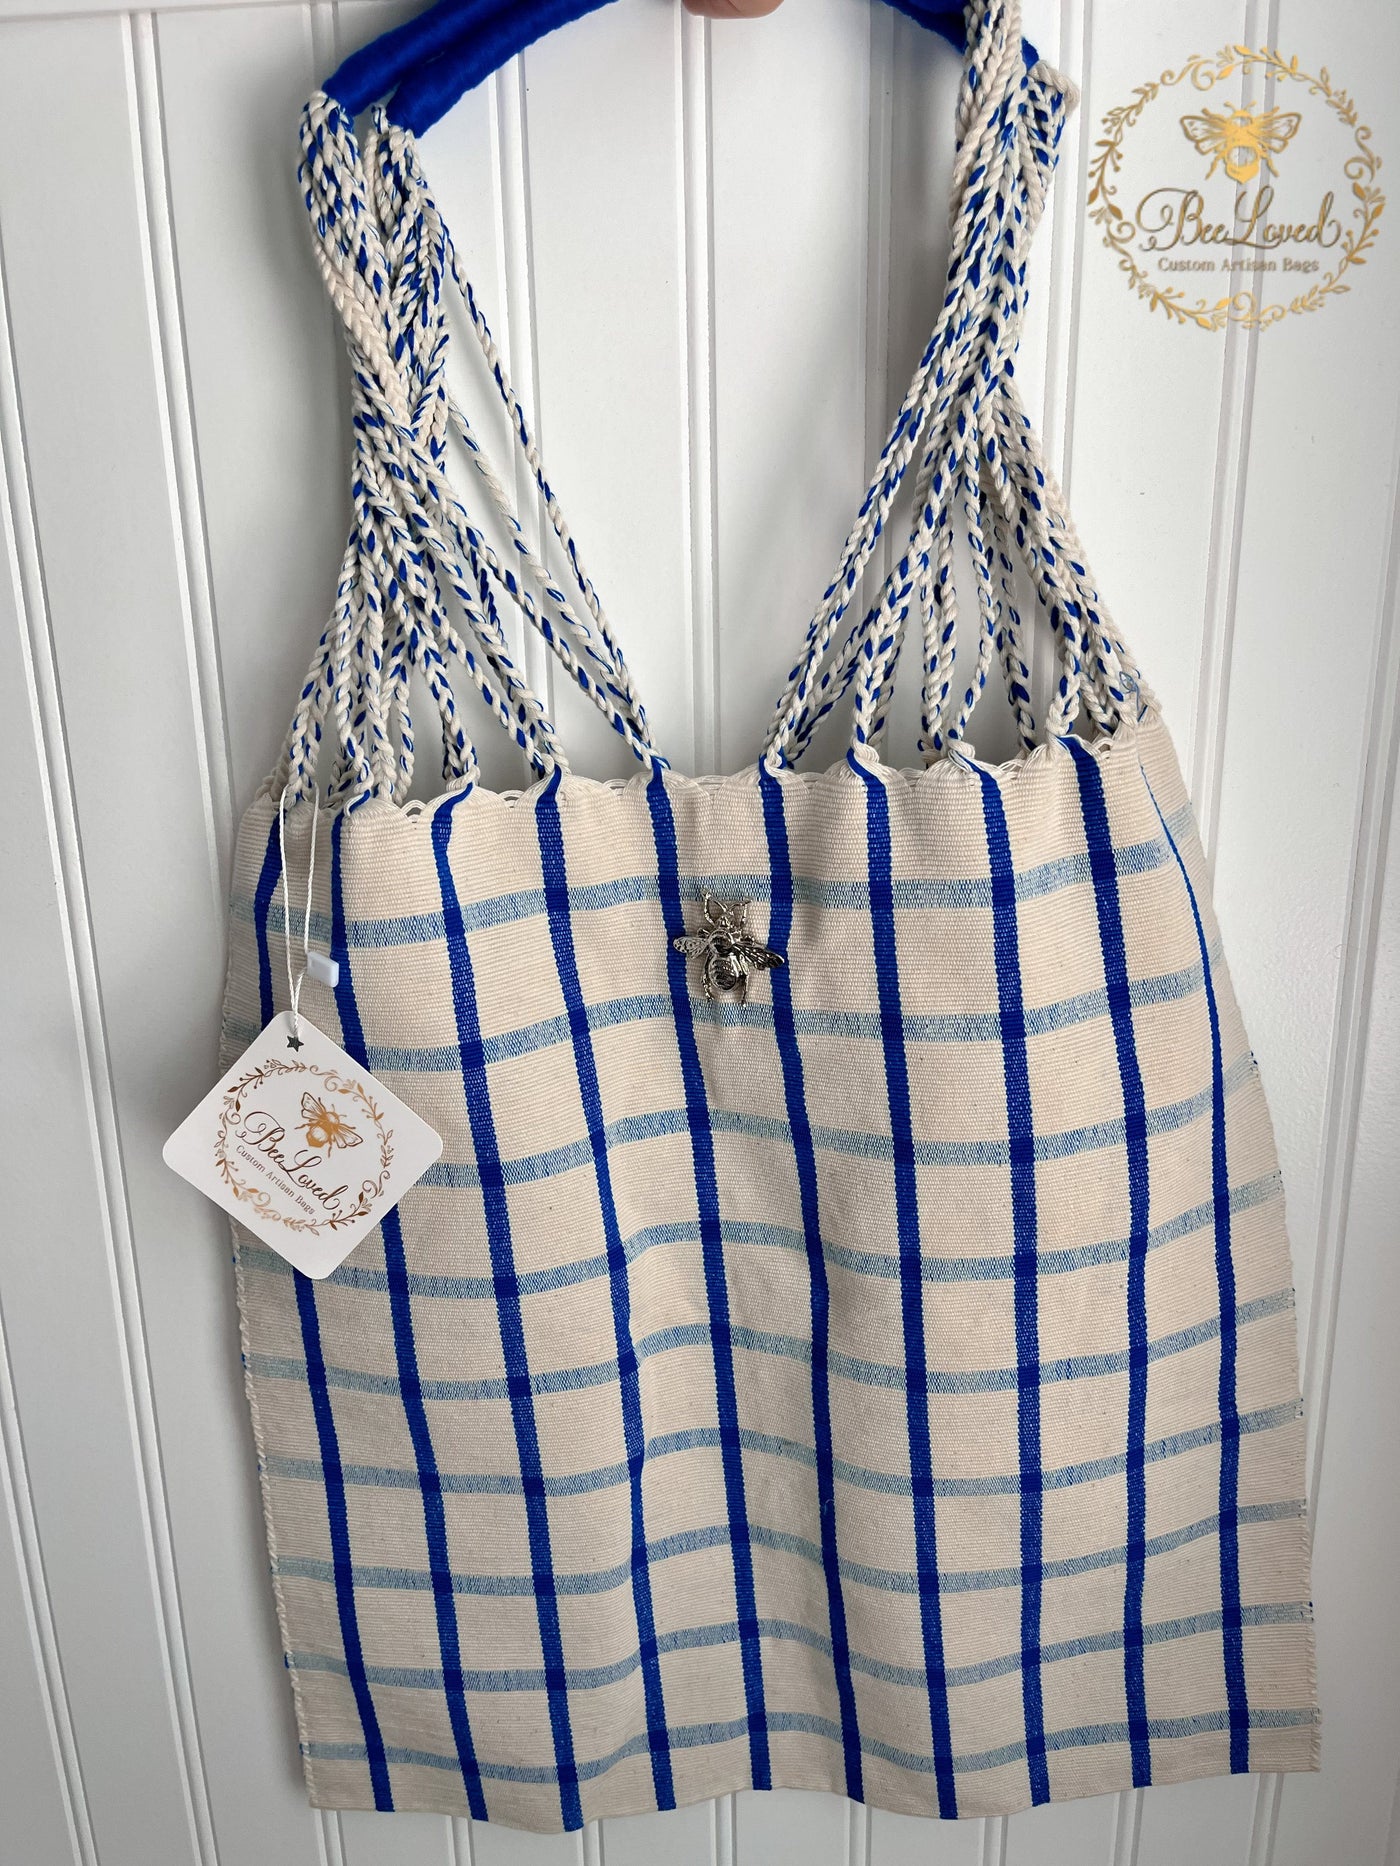 BeeLoved Custom Artisan Bags and Gifts Bluebell Fabric Tote Bag